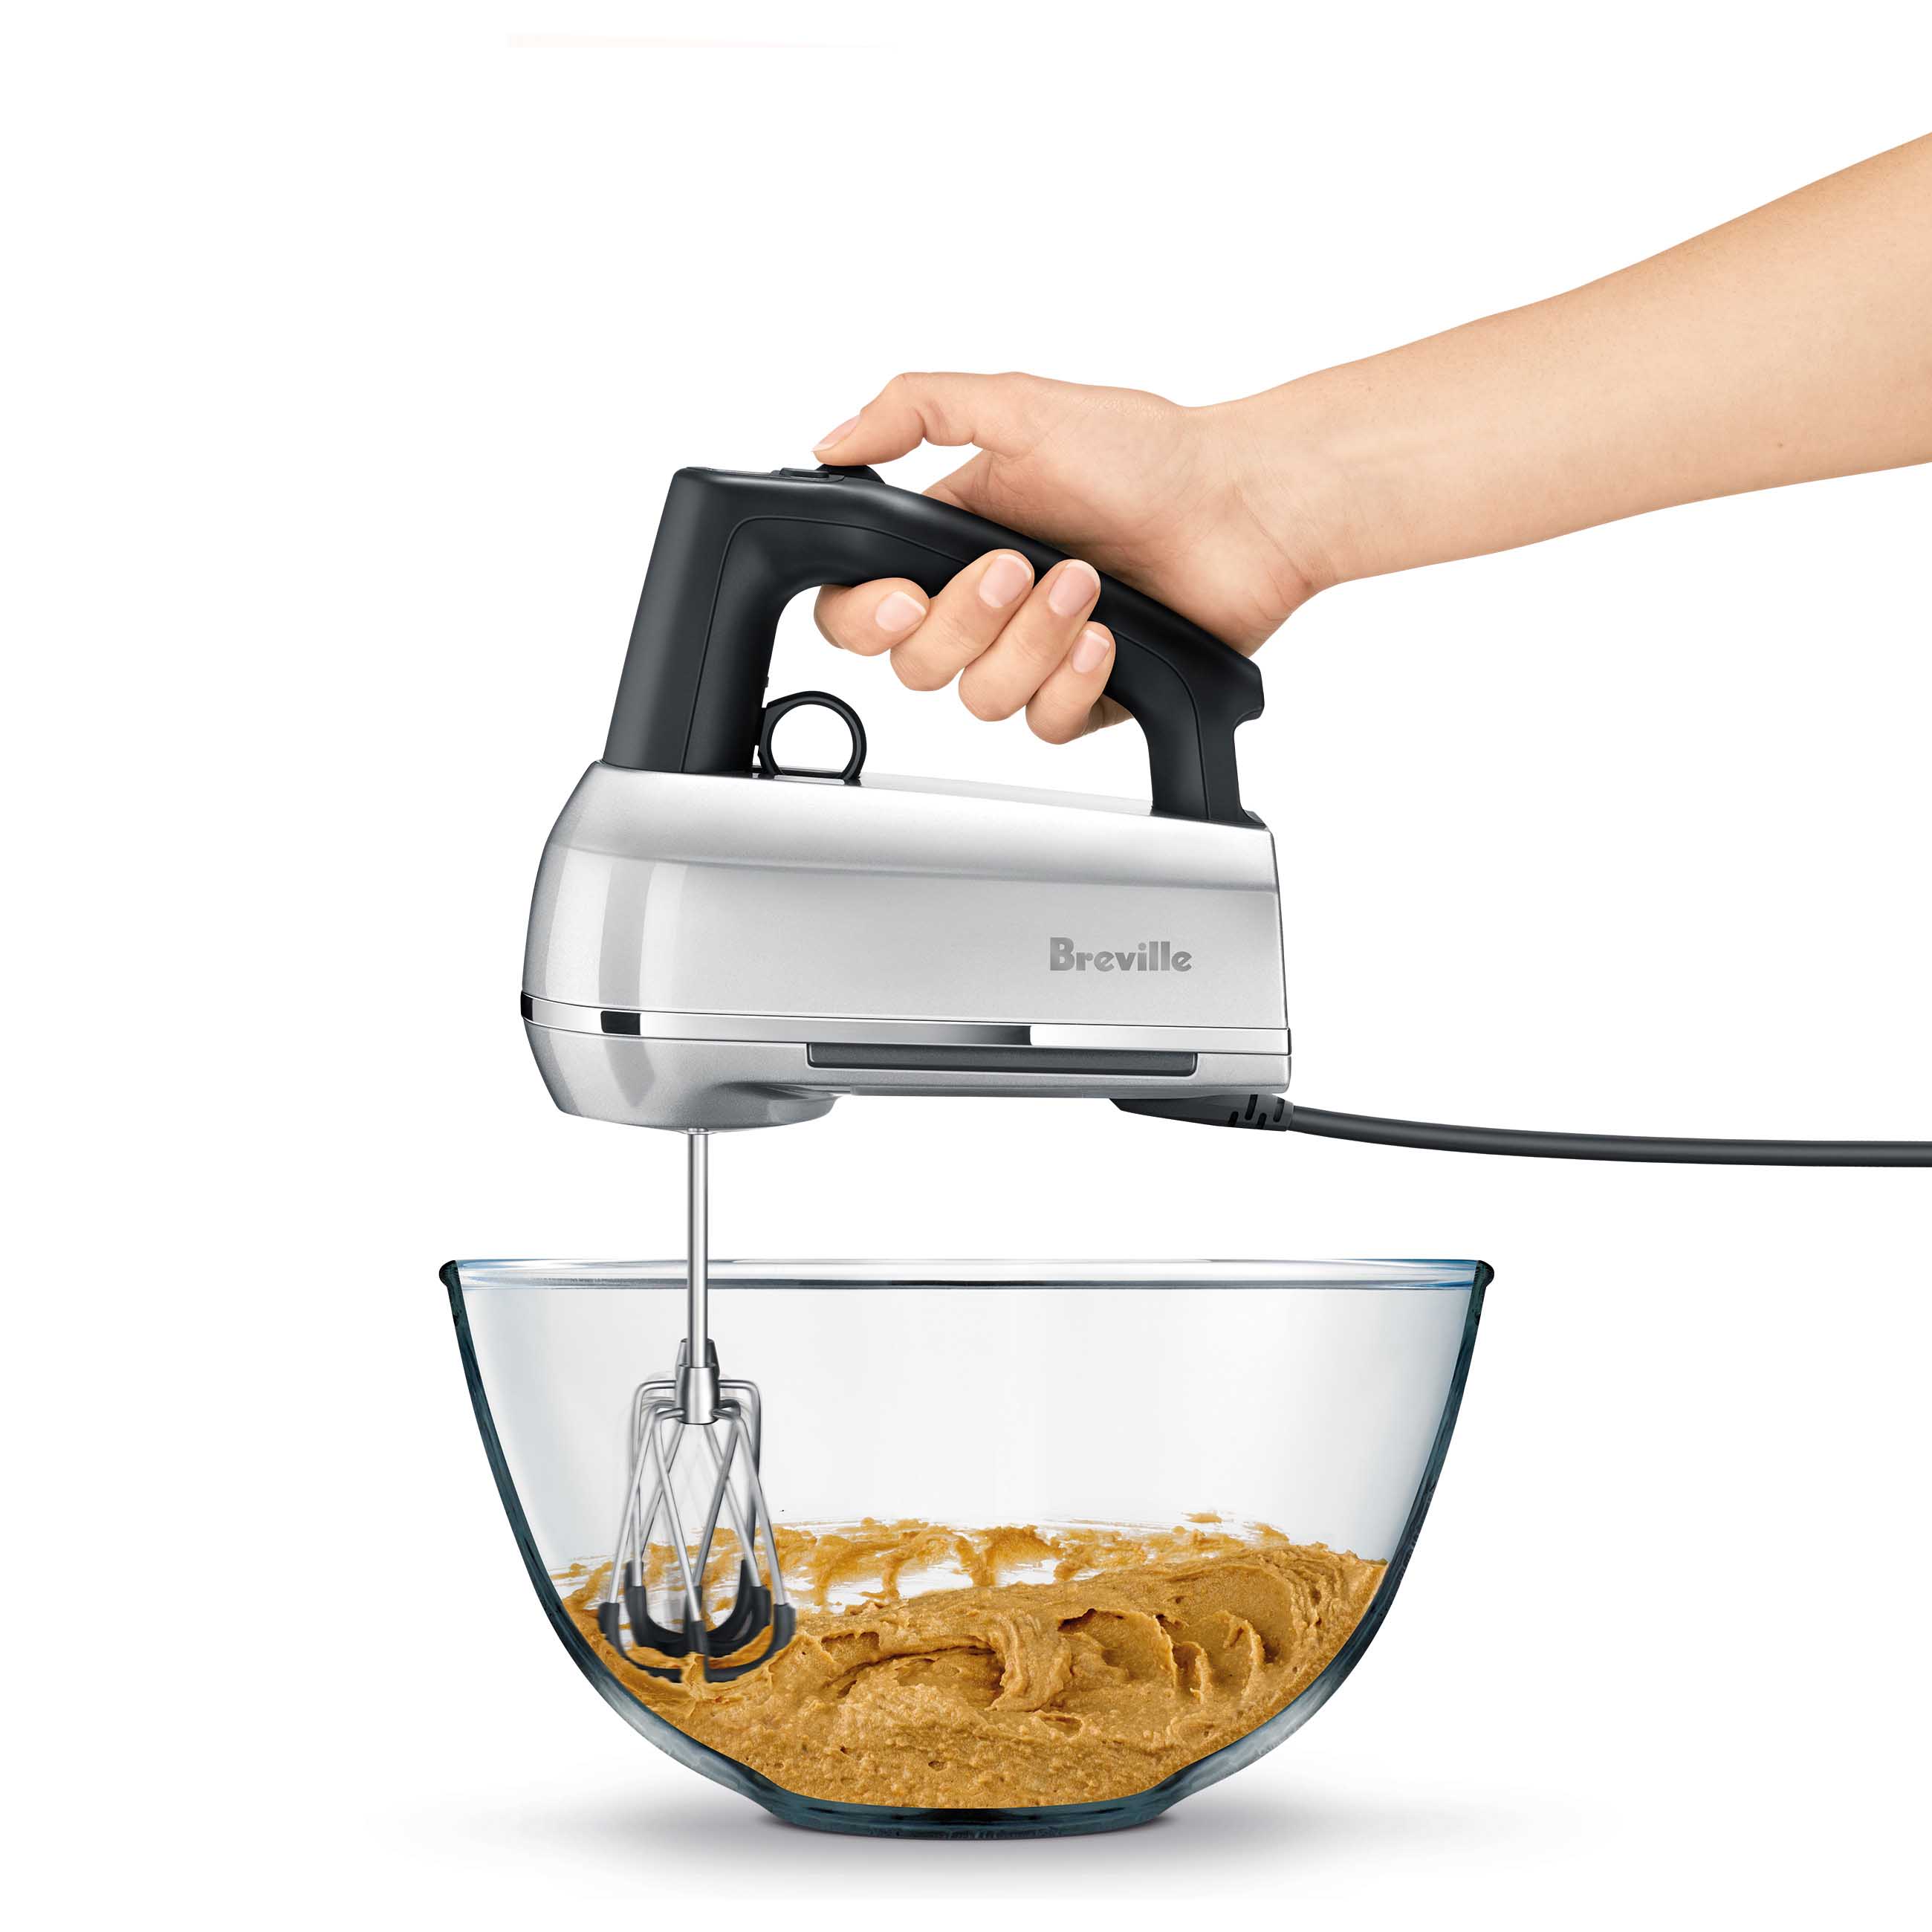 https://www.breville.com/content/dam/breville/ca/assets/mixers/finished-goods/bhm800-the-handy-mix-scraper/bhm800silusc-the-handy-mix-scraper/images/BHM800SILUSC-the-handy-mix-scraper-food-prep-mixers-carousel4.jpg